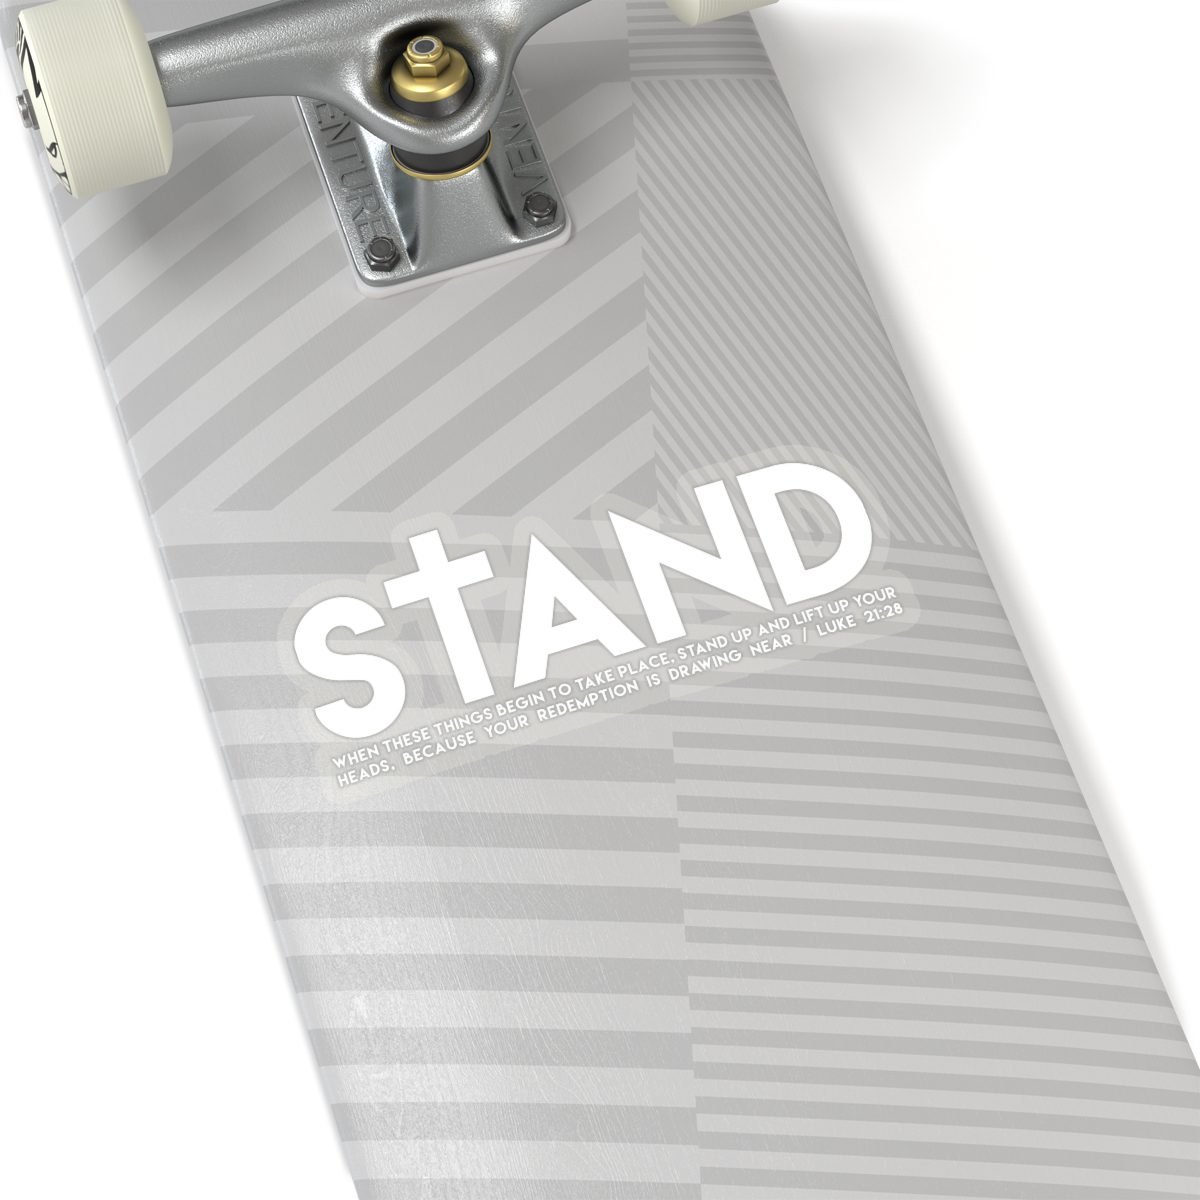 STAND by Designs of Defiance White Die Cut Stickers